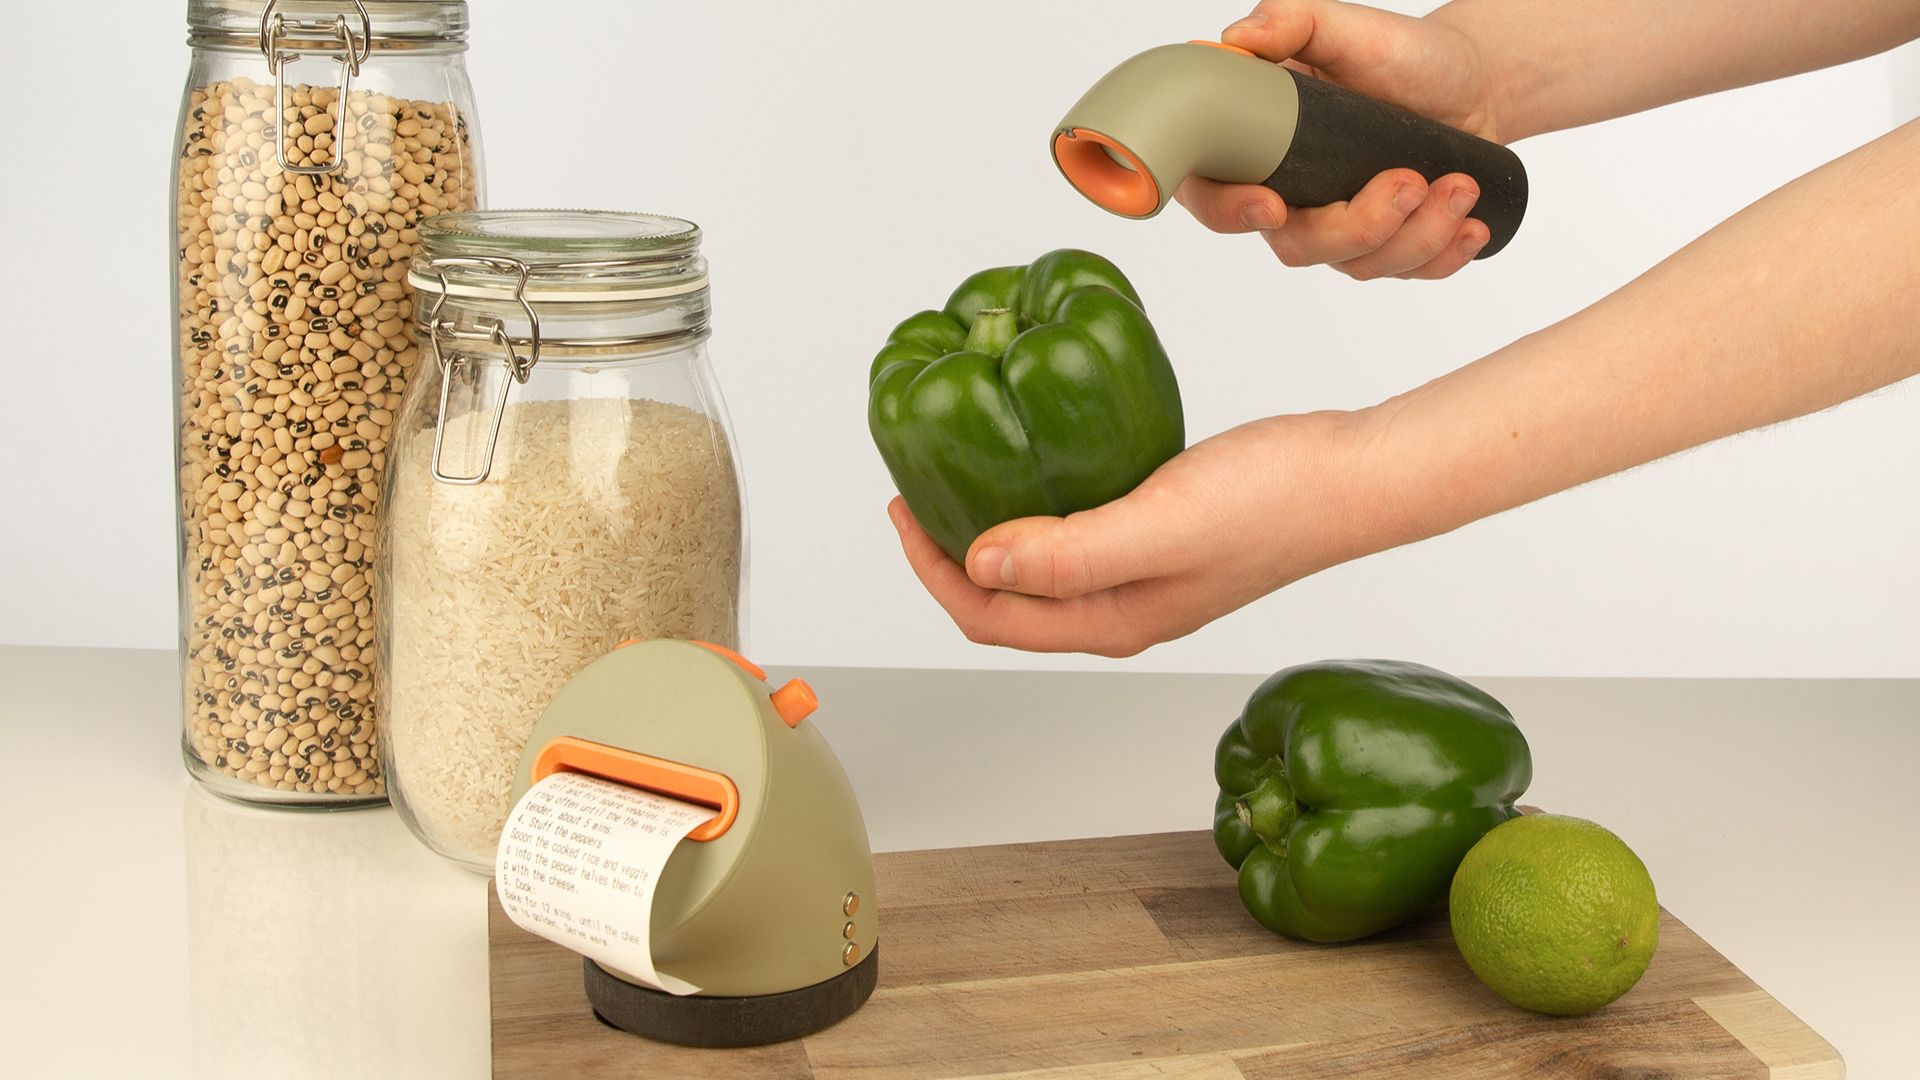 http://designwanted.com/wp-content/uploads/2023/03/Unique-eco-friendly-kitchen-products-for-a-sustainable-future-cover.jpg